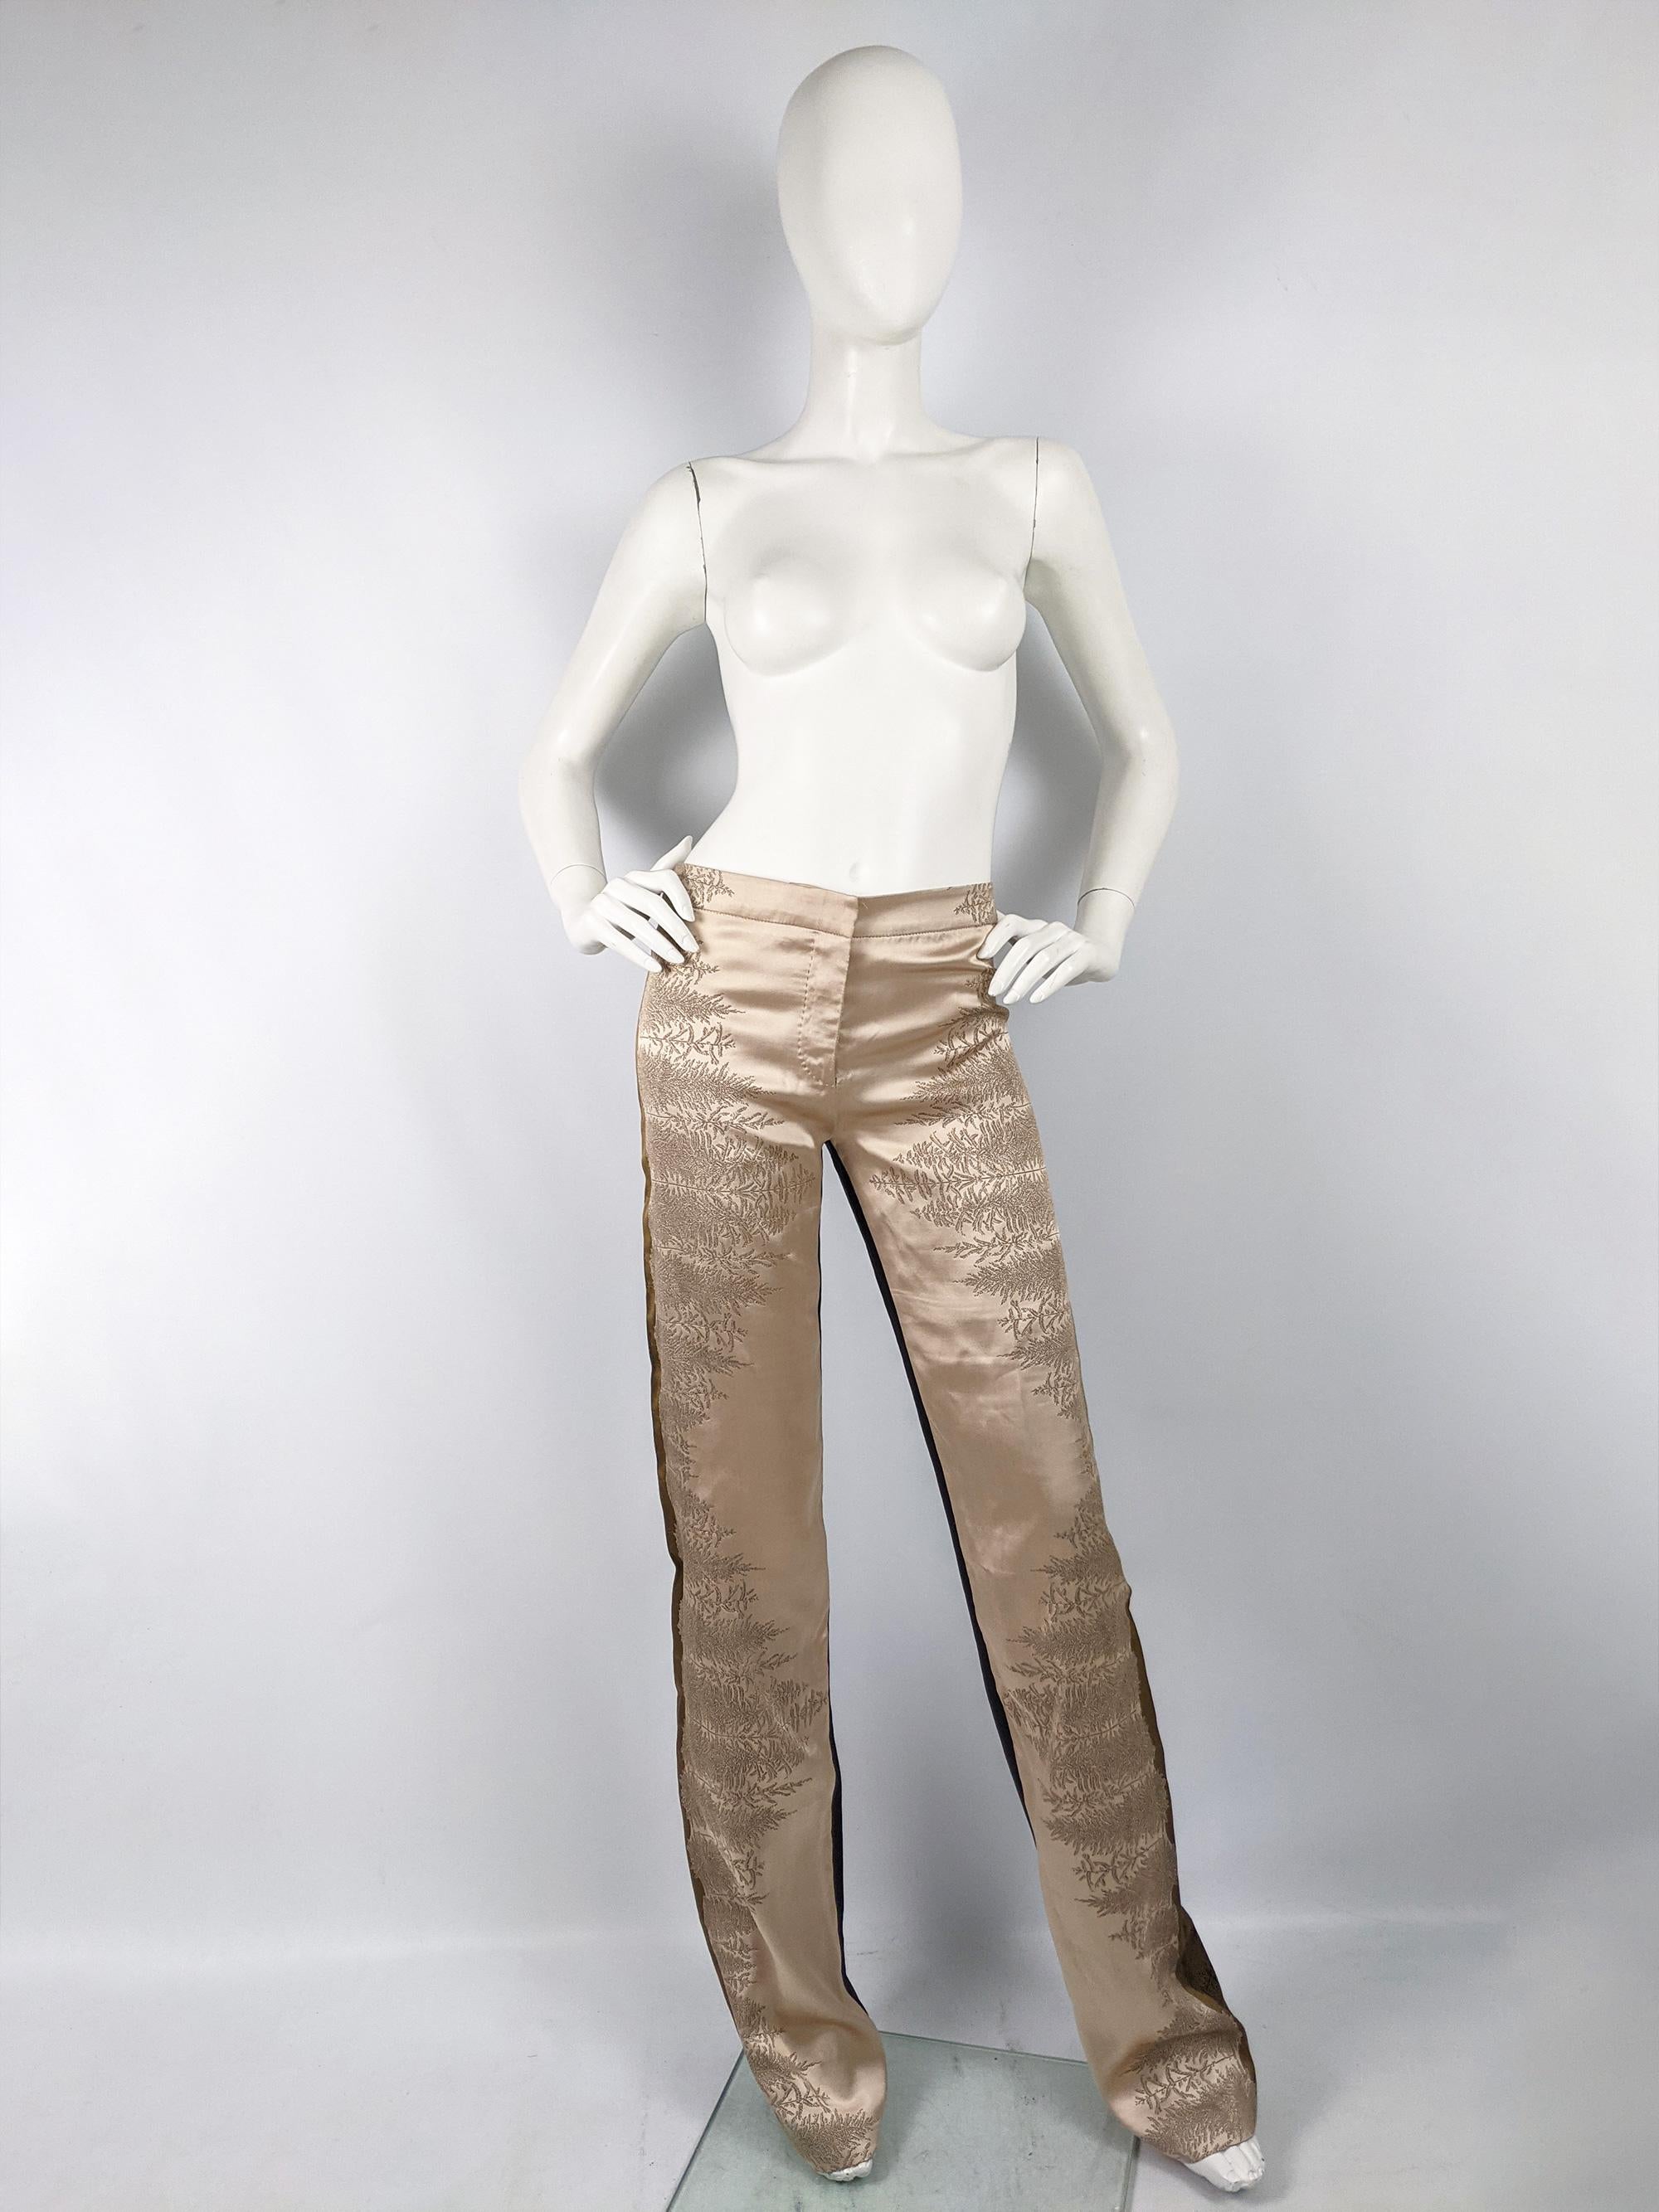 A fabulous pair of vintage Alexander McQueen trousers from the Pre-Spring 2008 collection. In a pale pink silk satin with a leaf pattern in jacquard weave on the front and a black silk with a gold brocade pattern at the back. In a typical McQueen